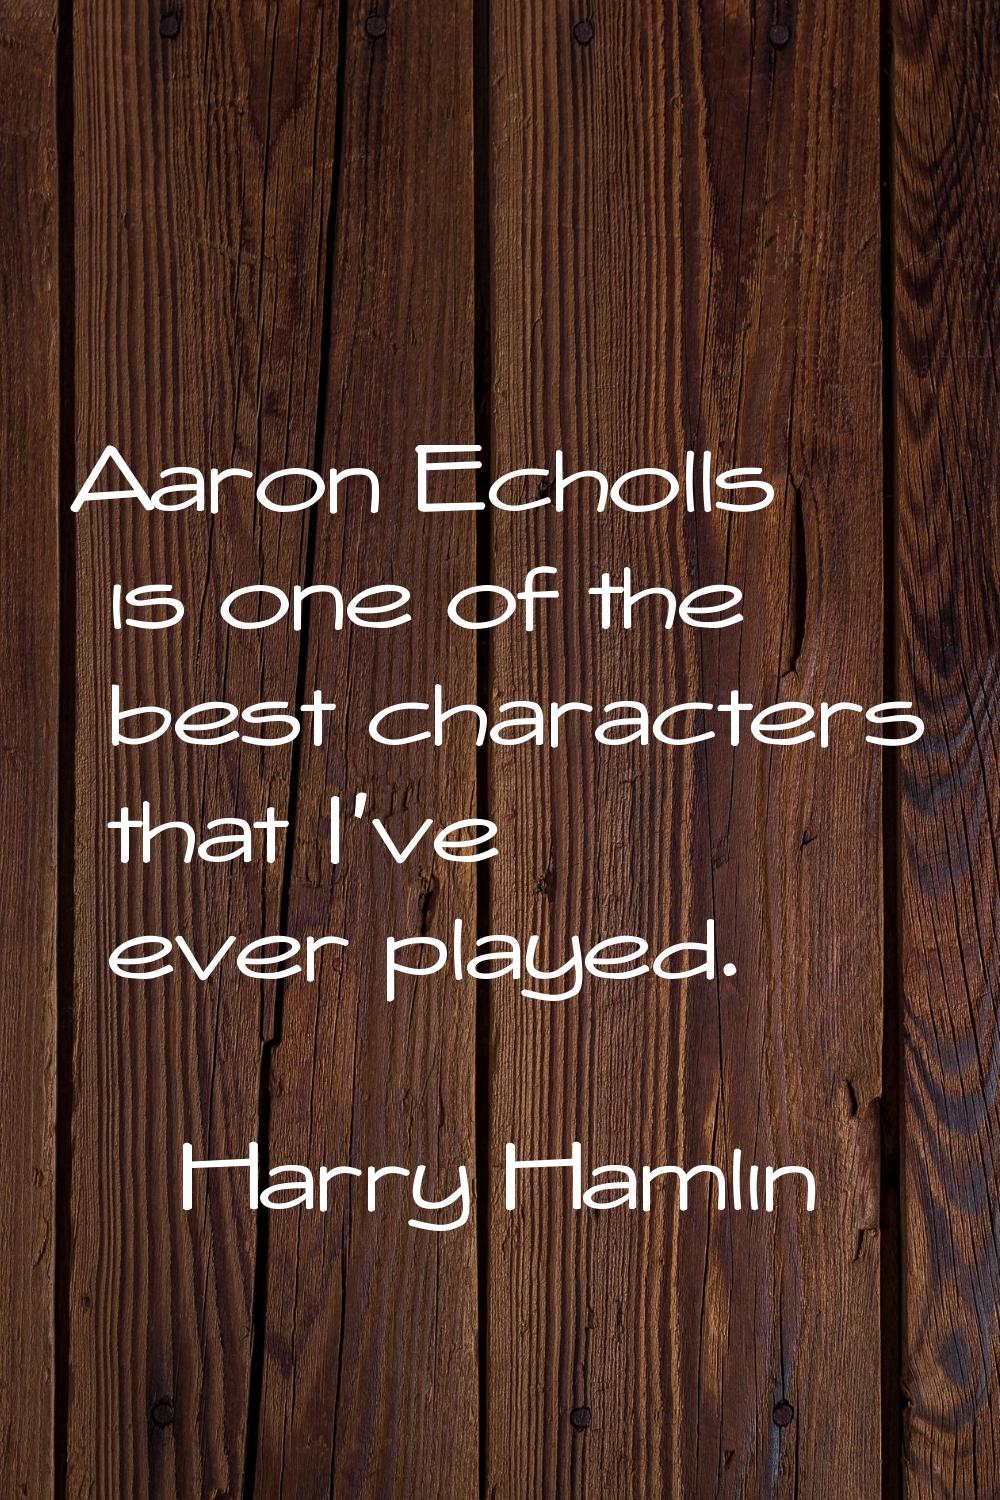 Aaron Echolls is one of the best characters that I've ever played.